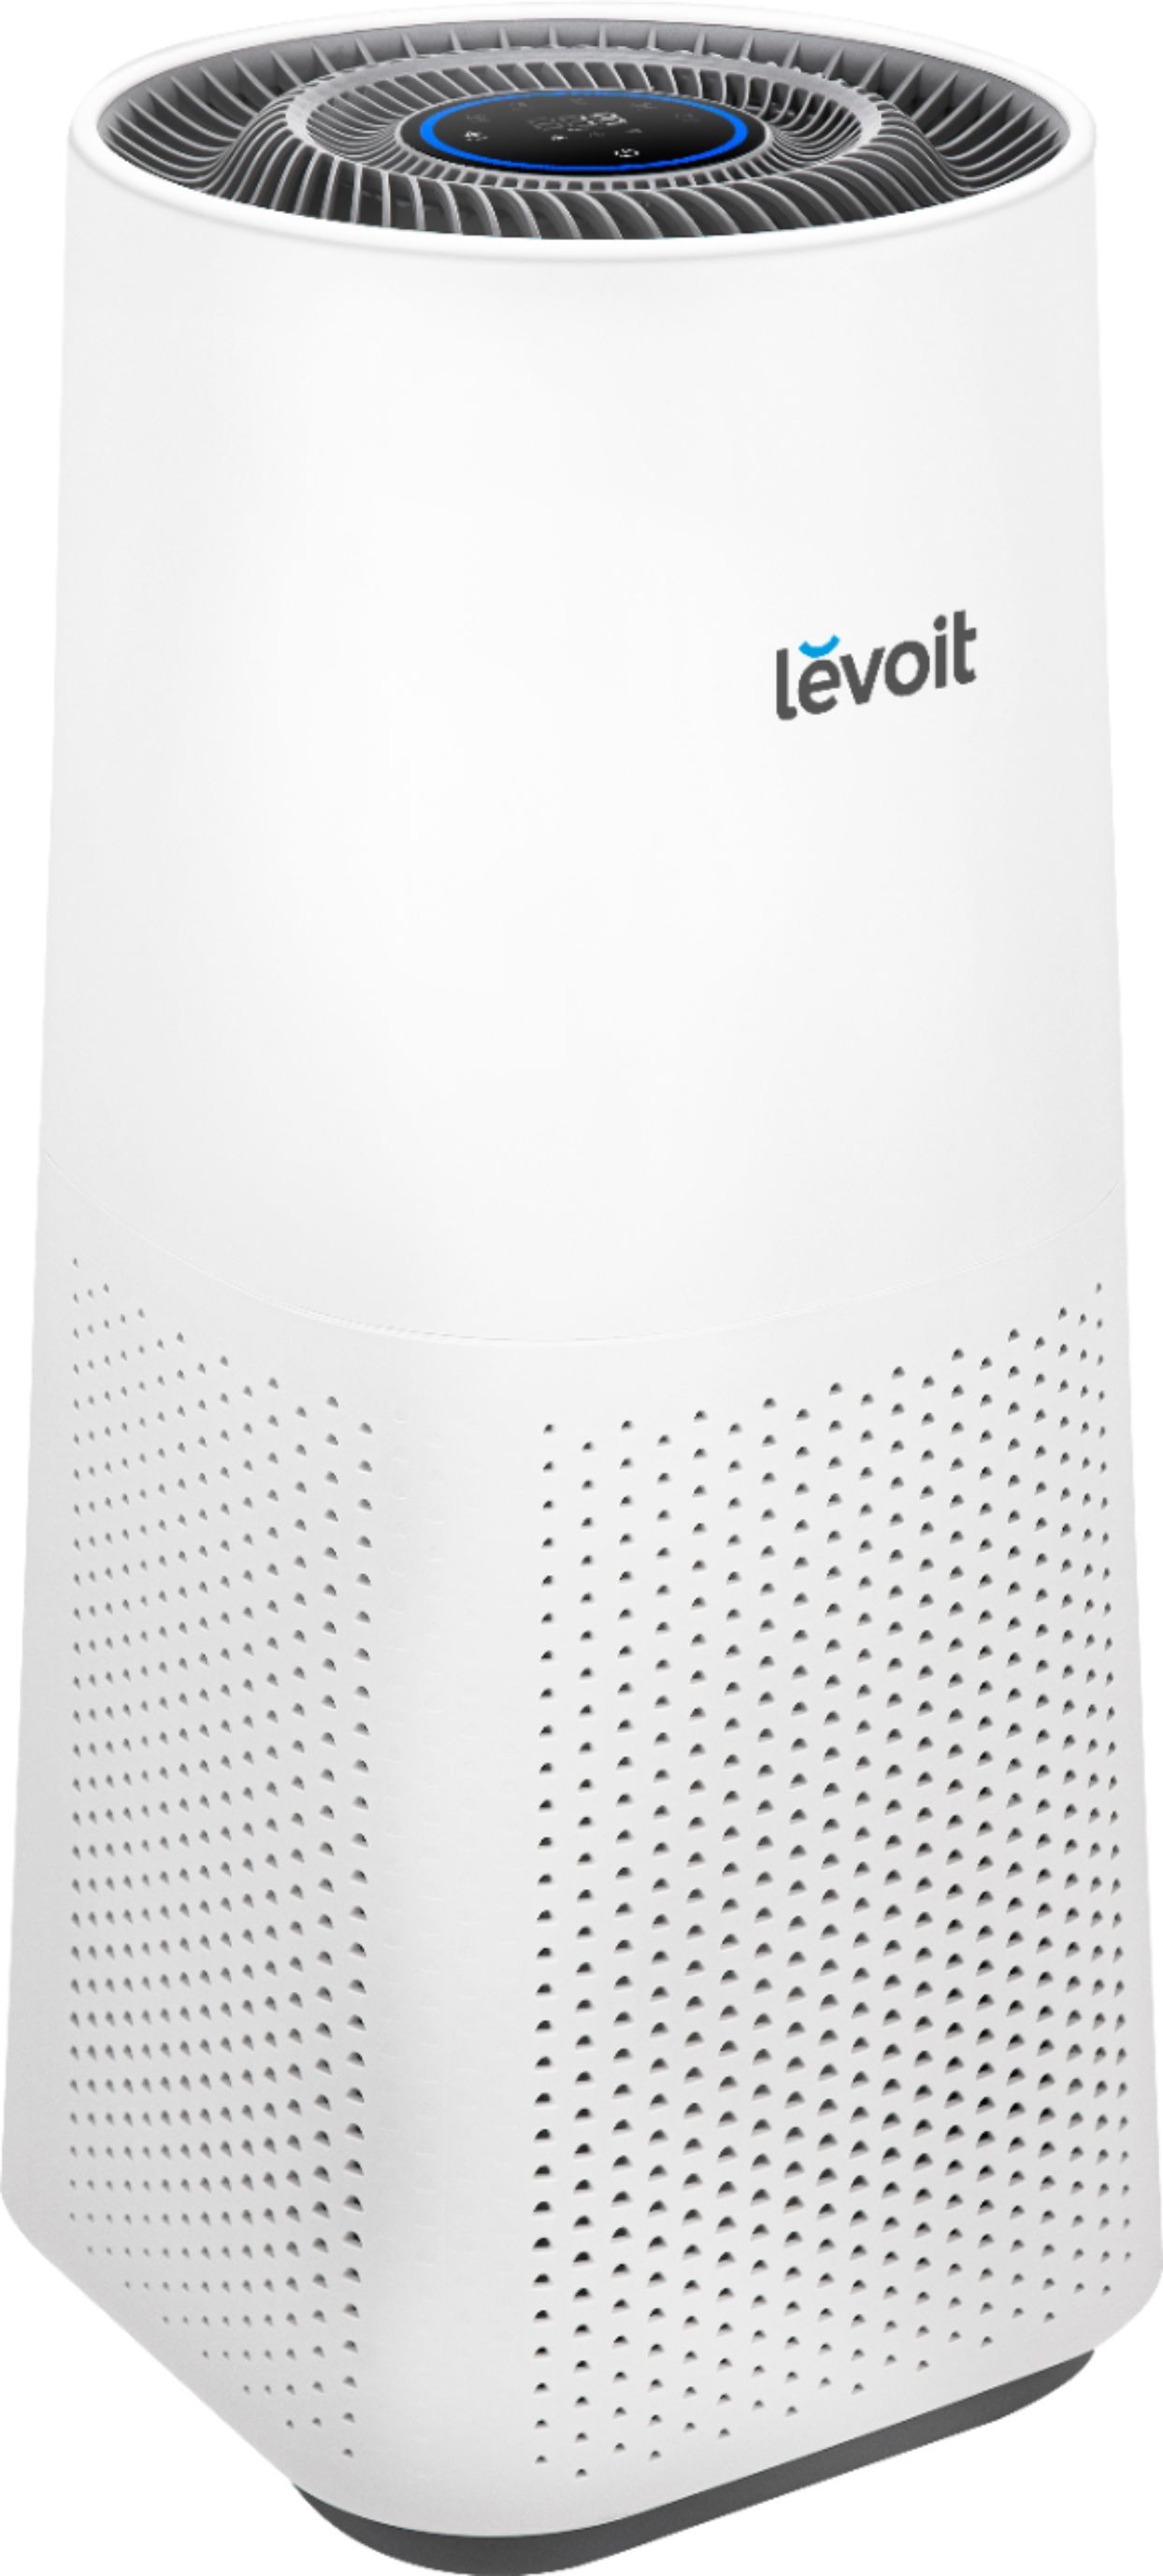 Angle View: GermGuardian - AP5800W 19" Hi-Performance Air Purifier Tower Console with HEPA Filter & Air Quality Sensor - White